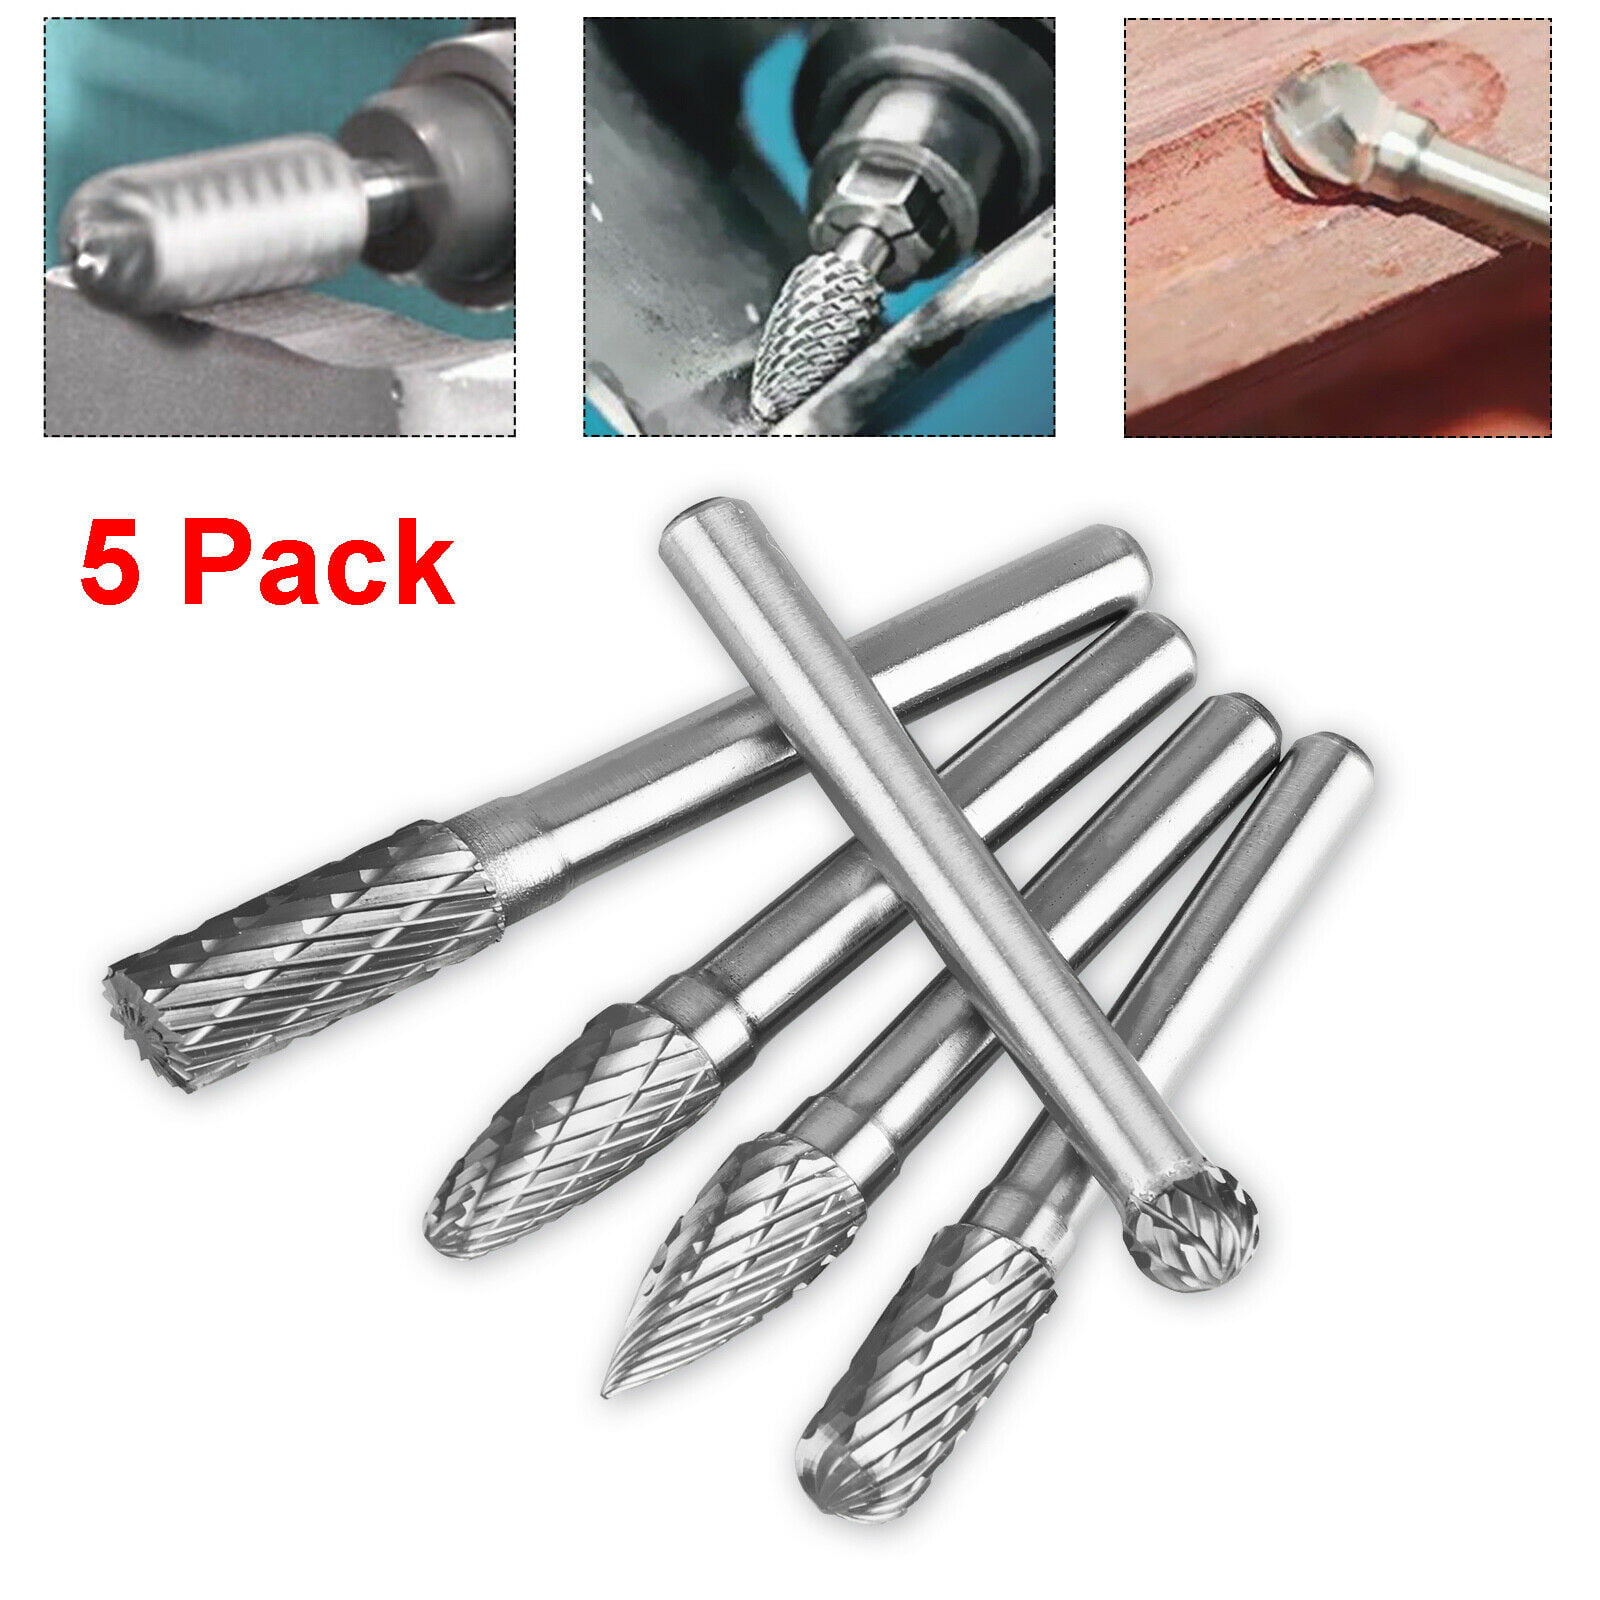 5Pcs Carbide Burrs Set Metal Carving,Polishing,Engraving,Drilling 8mm Head Double Cut Solid Tungsten Carbide Rotary Burr Set with 1/4-Inch Shank for Die Grinder Drill 